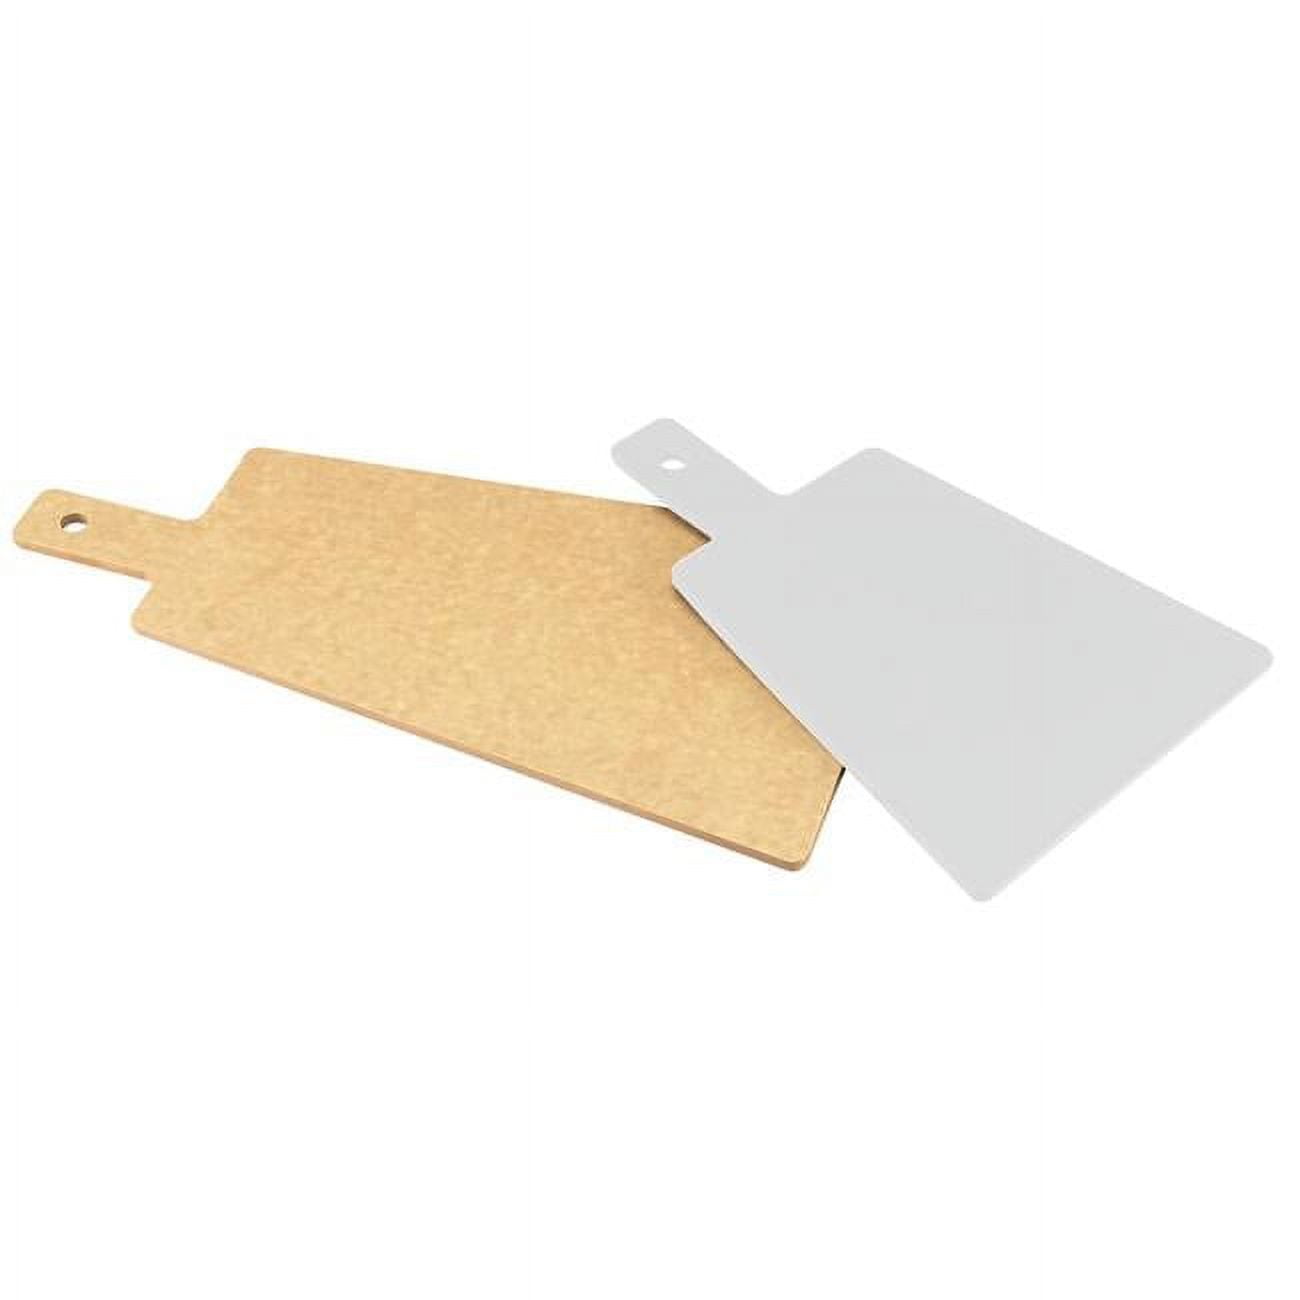 Picture of Cal Mil 1535-16-14 Natural Trapezoid Flat Bread Serving & Display Board with Handle - 15.625 x 8 x .25 in.